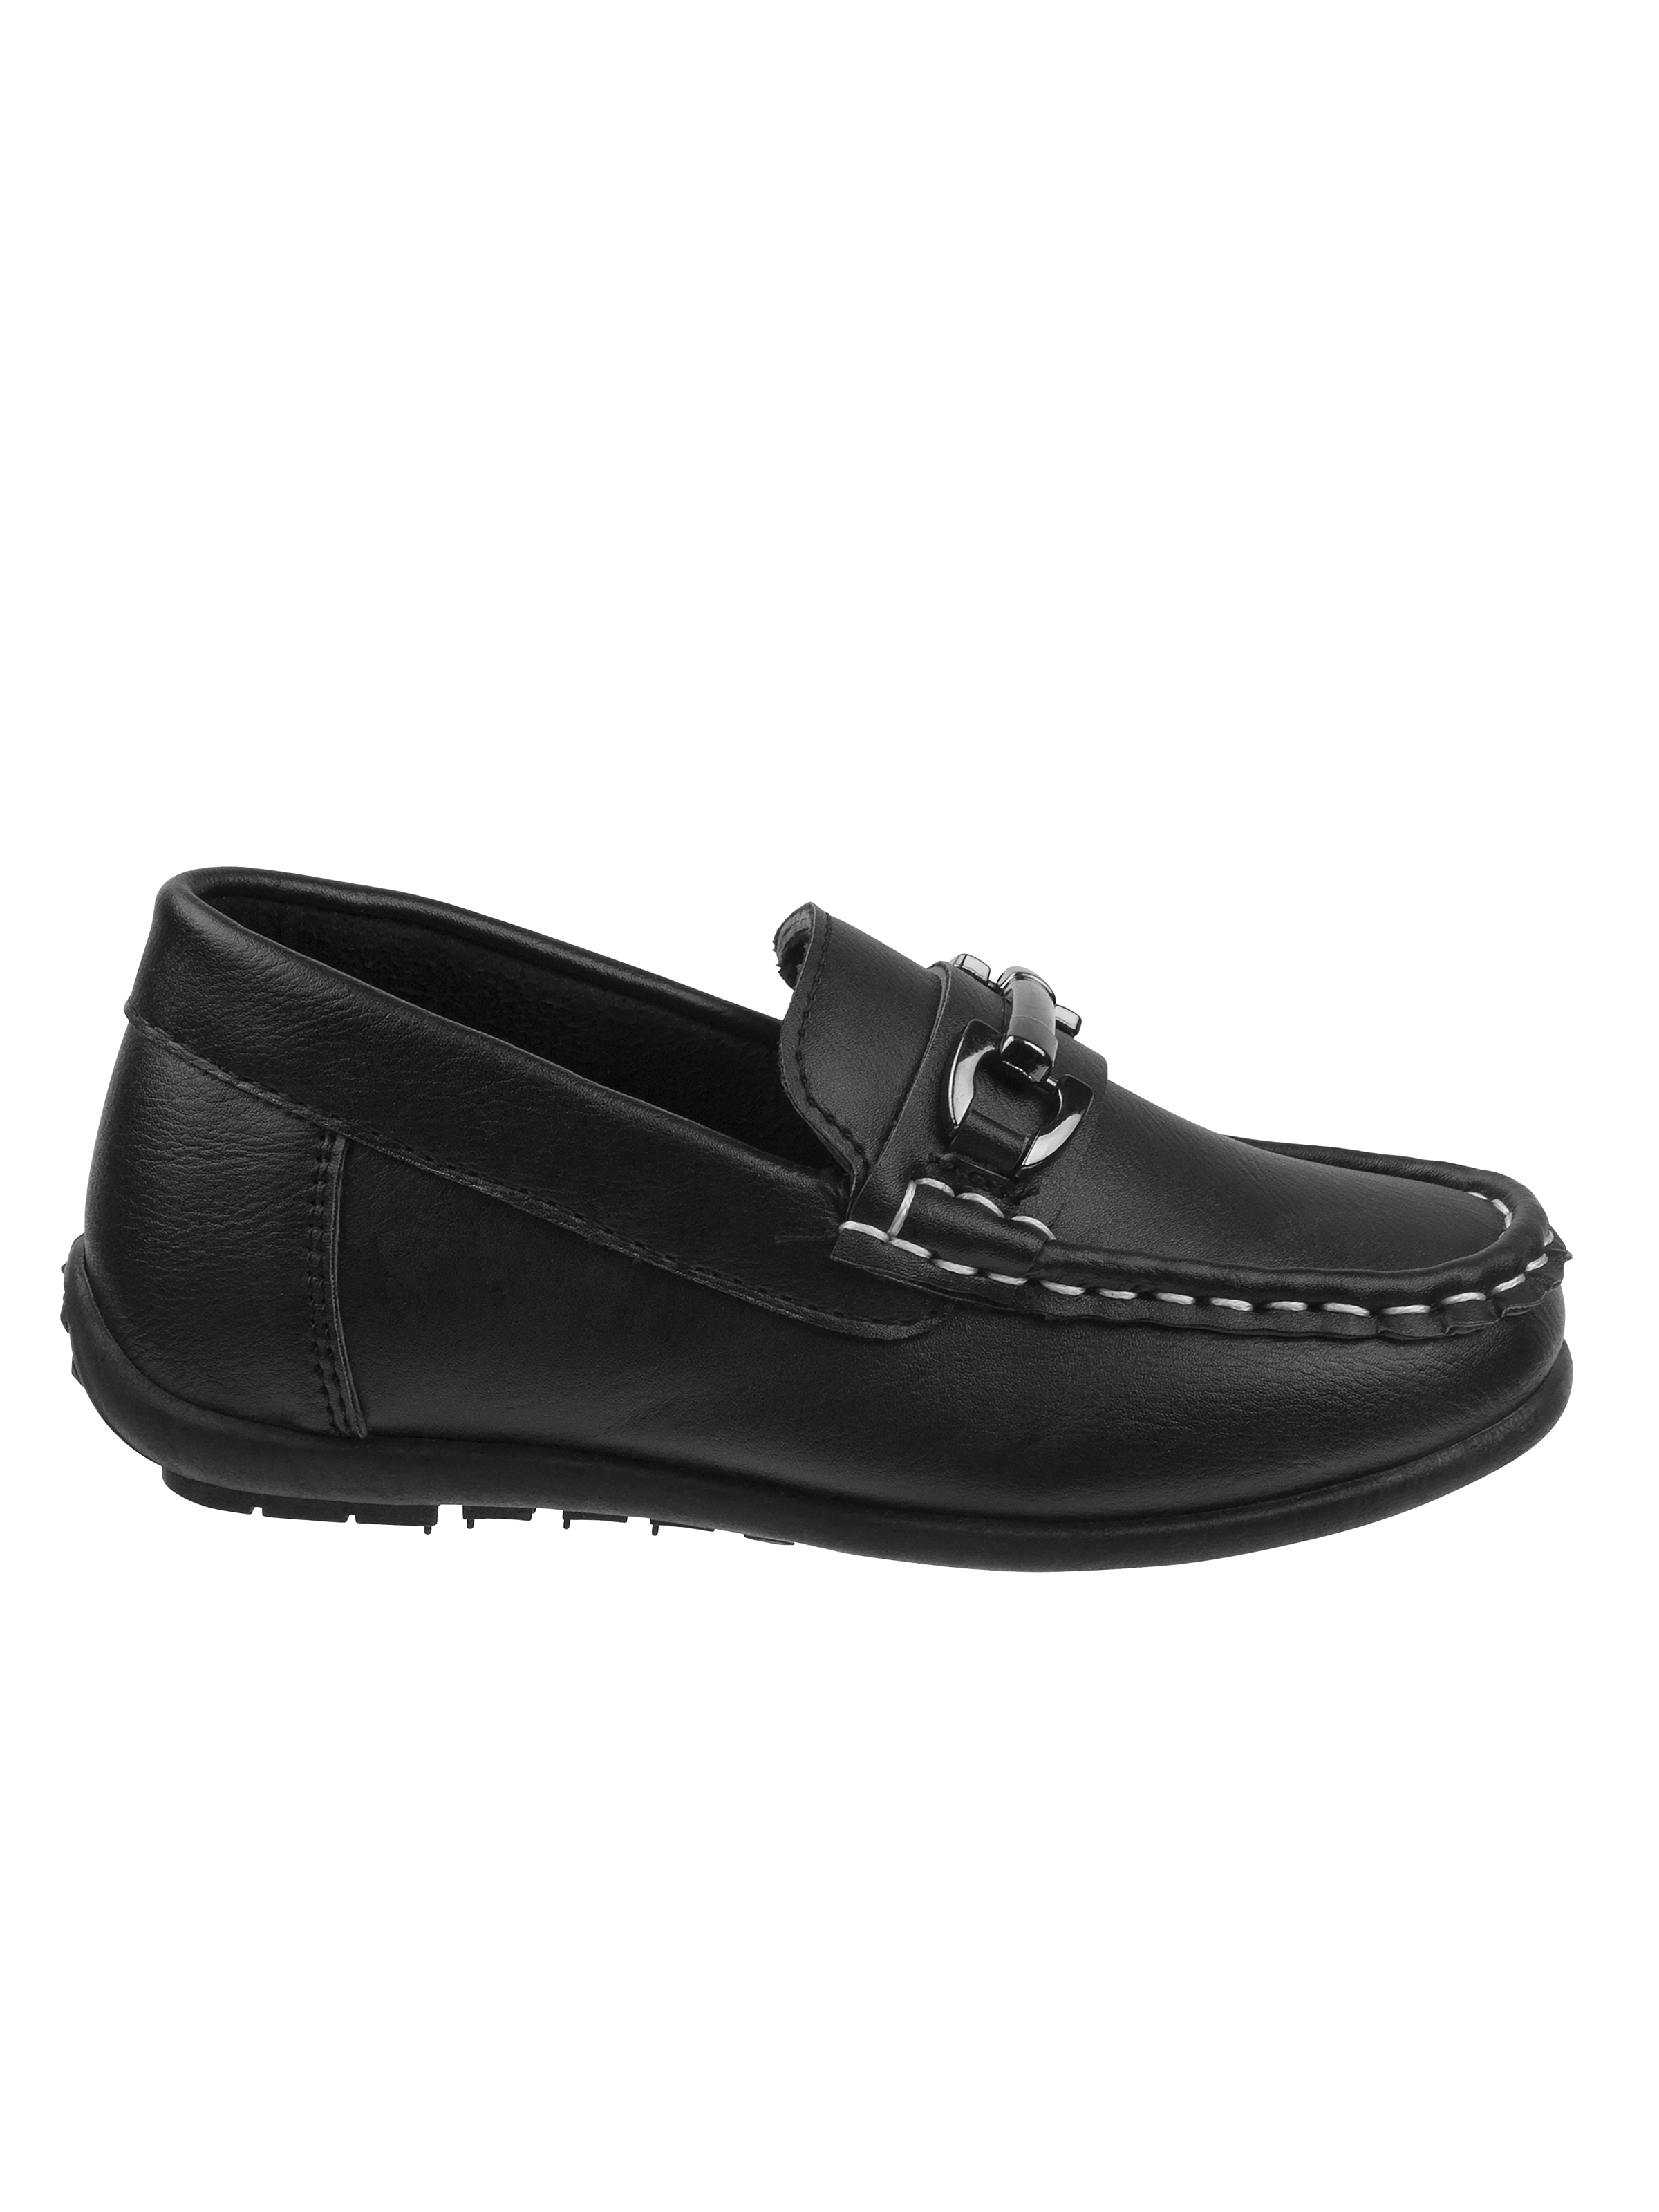 Josmo Boys Slip On Casual Shoes. (Little Kids/Big Kids) - image 2 of 5